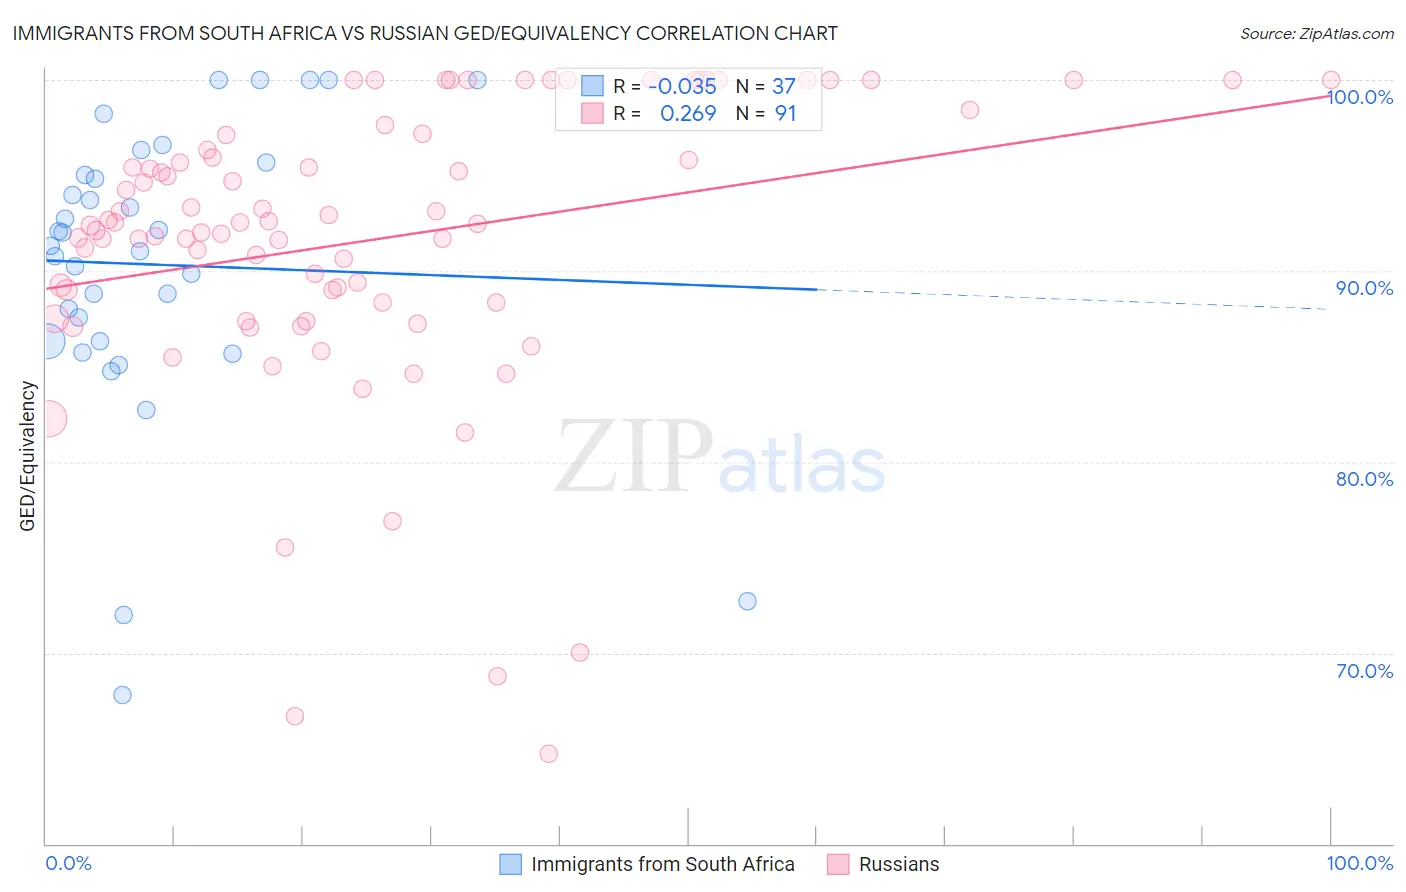 Immigrants from South Africa vs Russian GED/Equivalency